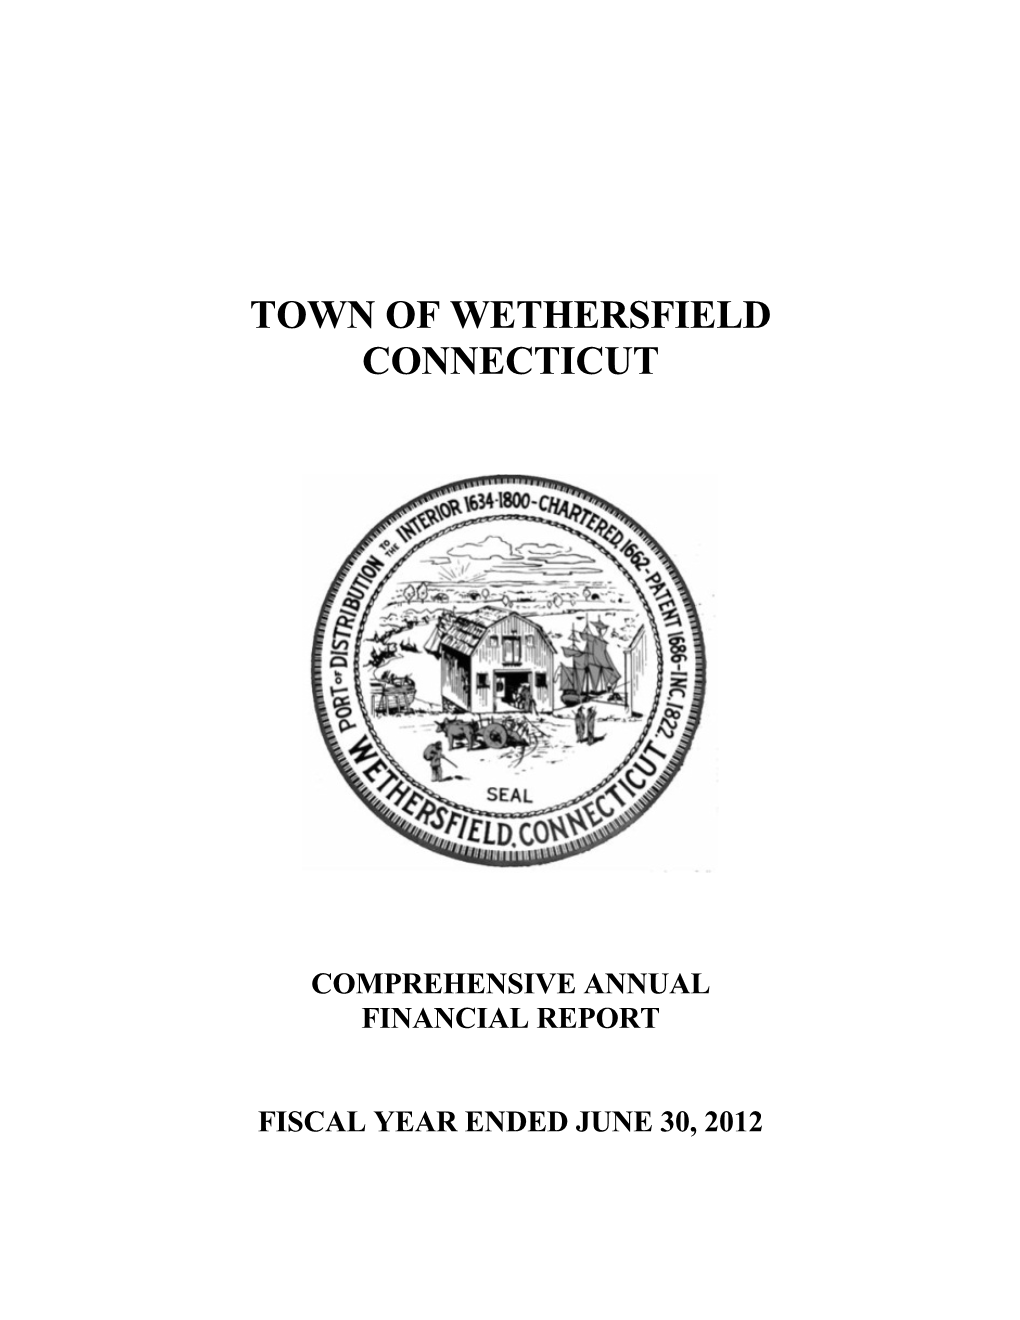 Town of Wethersfield Connecticut